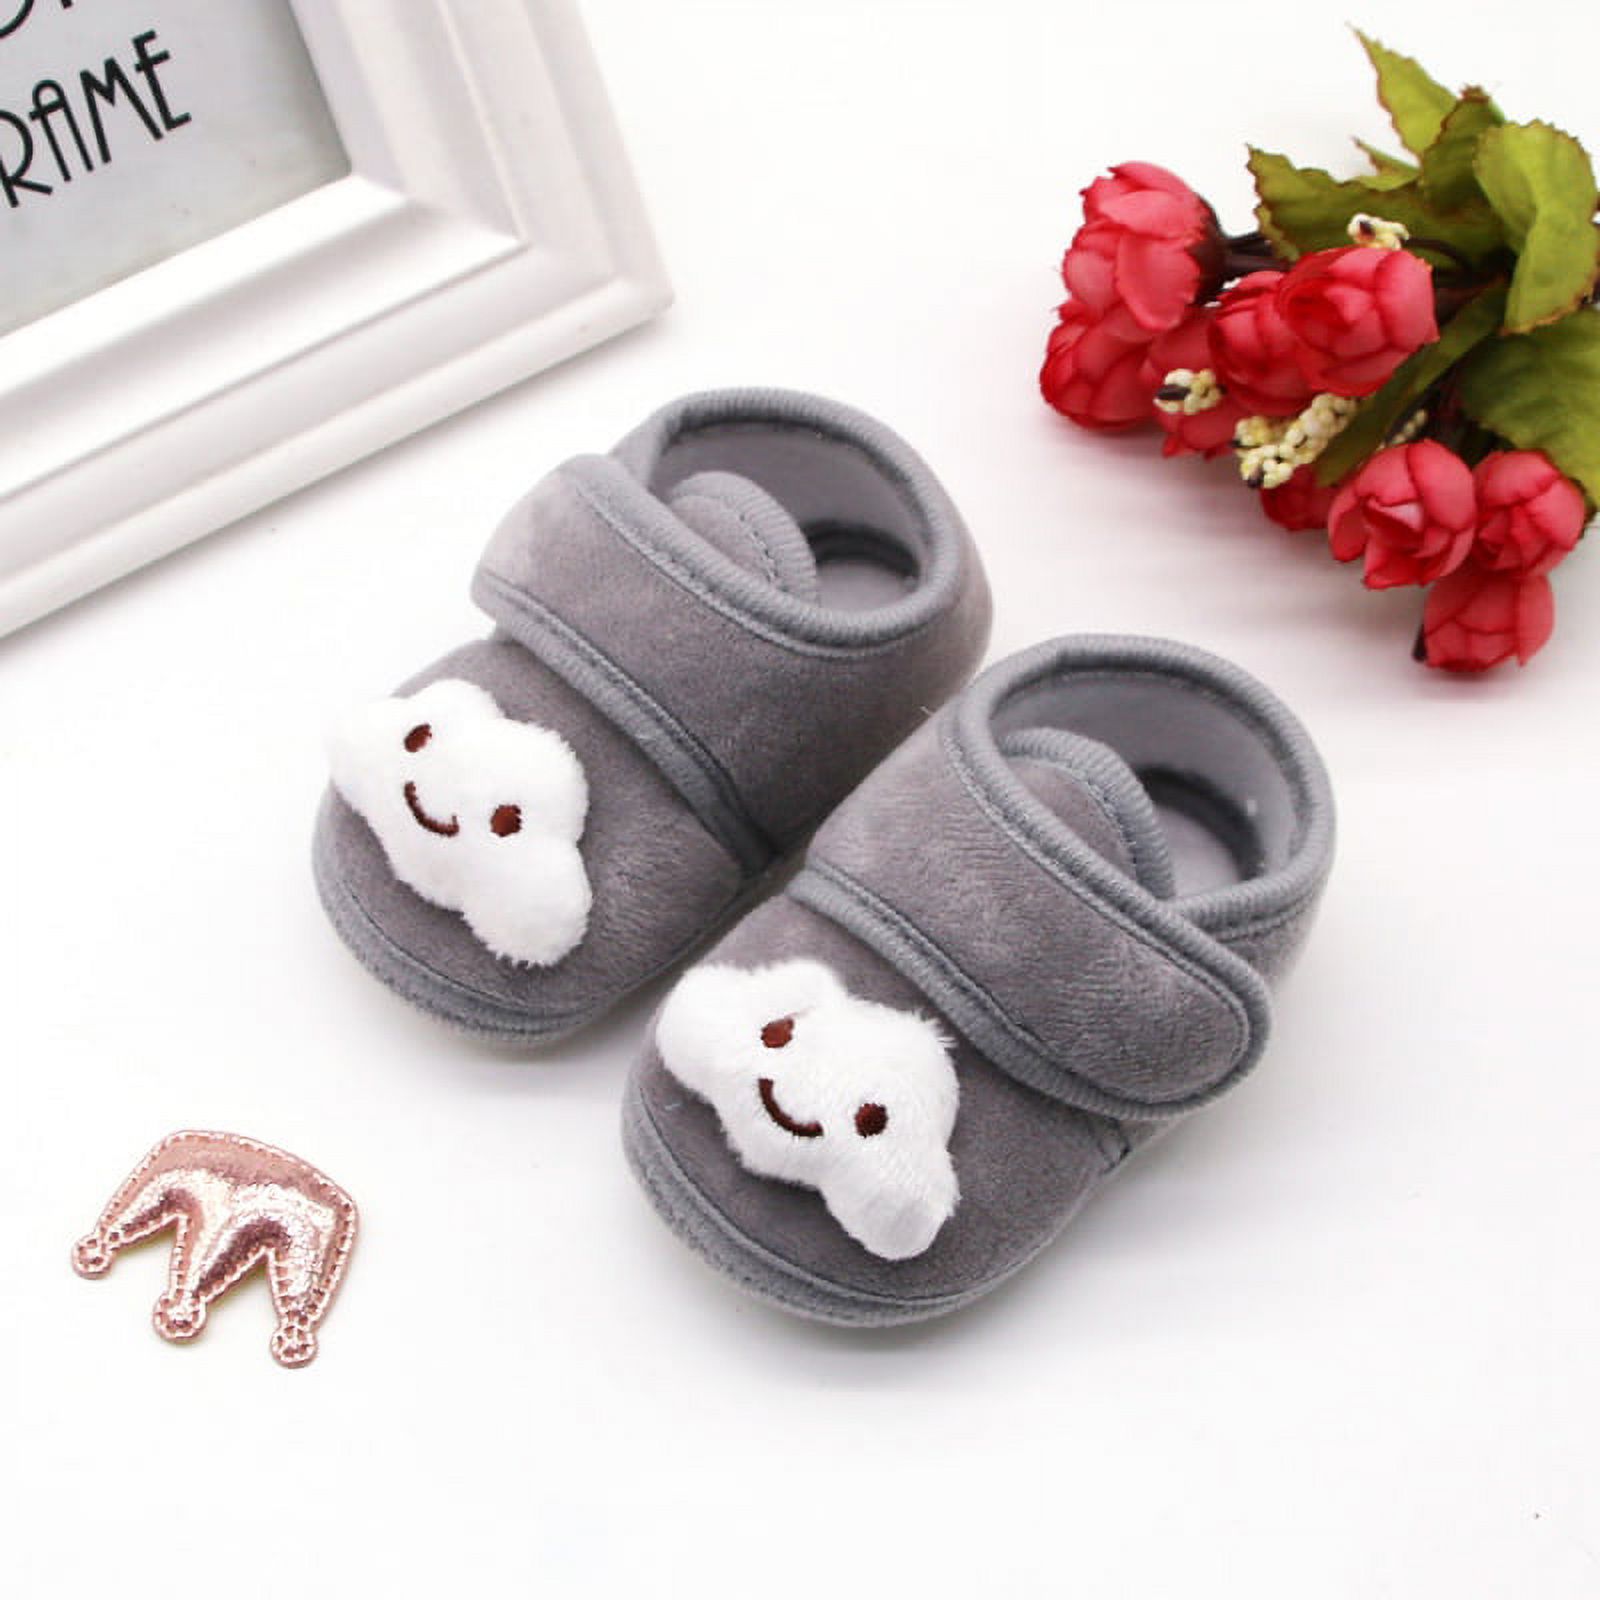 Infant Baby Boys Girls Slipper Soft Sole Non Skid Sneaker Moccasins Toddler First Walker Crib House Shoes - image 2 of 7